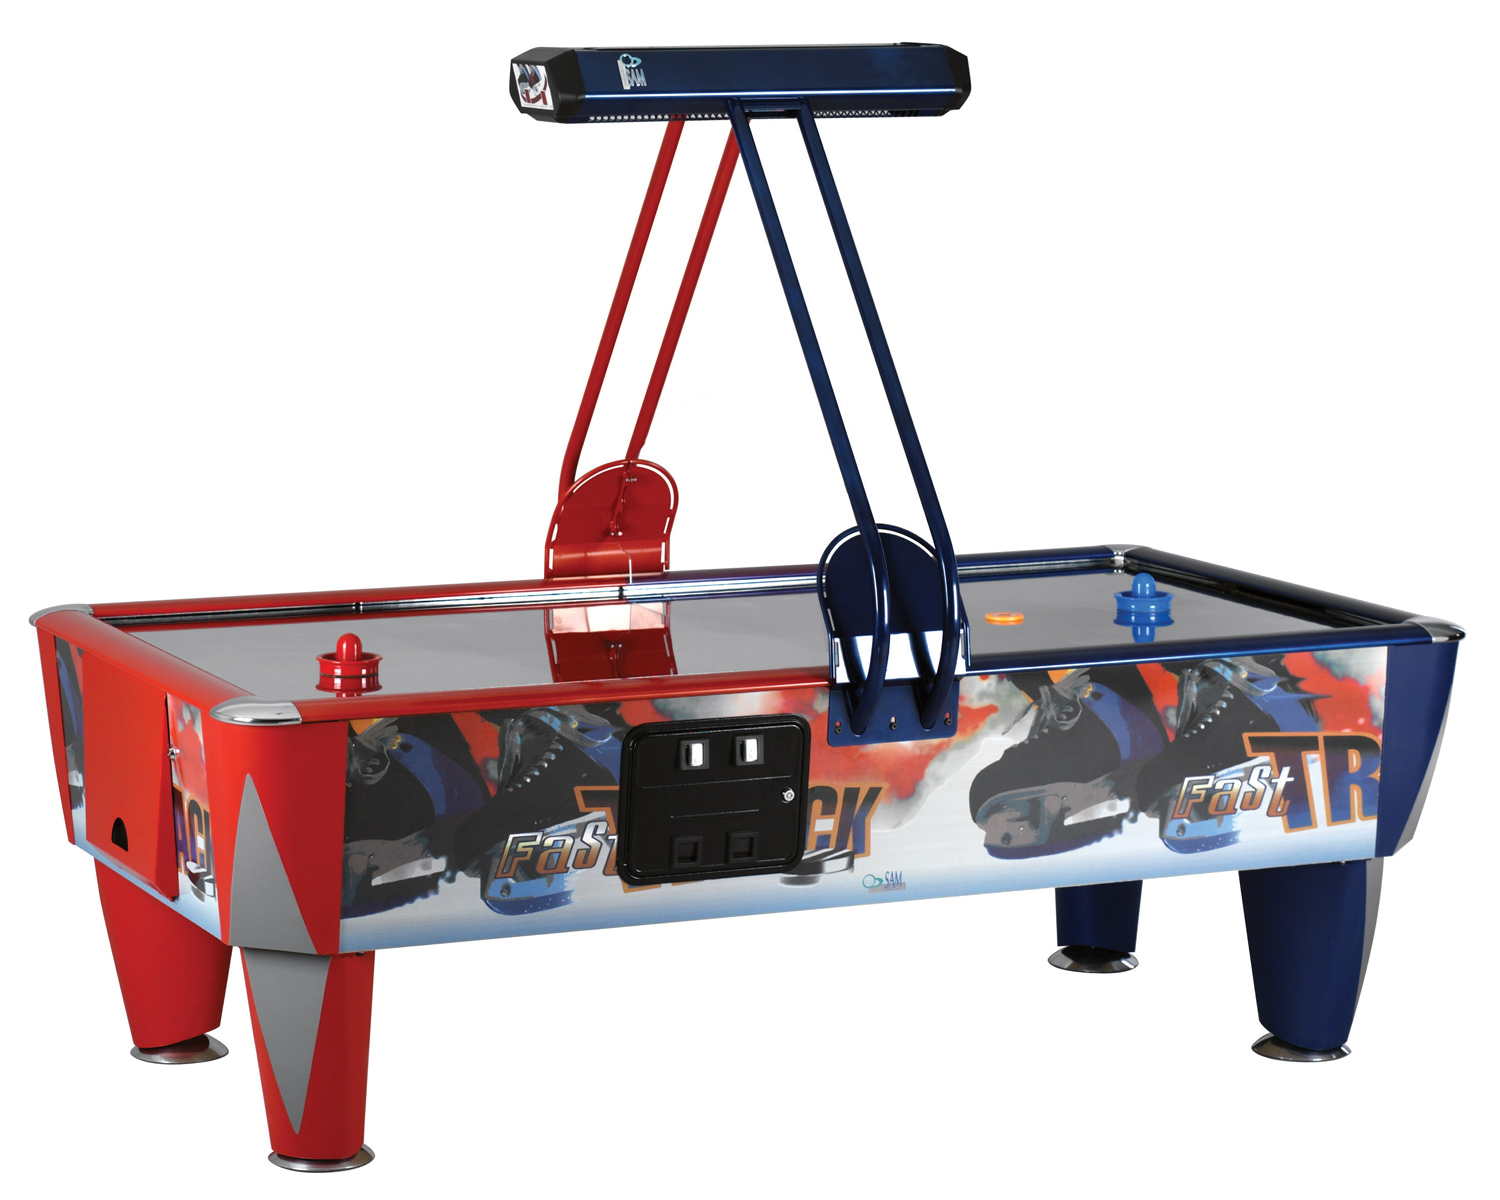 Reconditioned Fast Track MkII 8ft Commercial Air Hockey Table